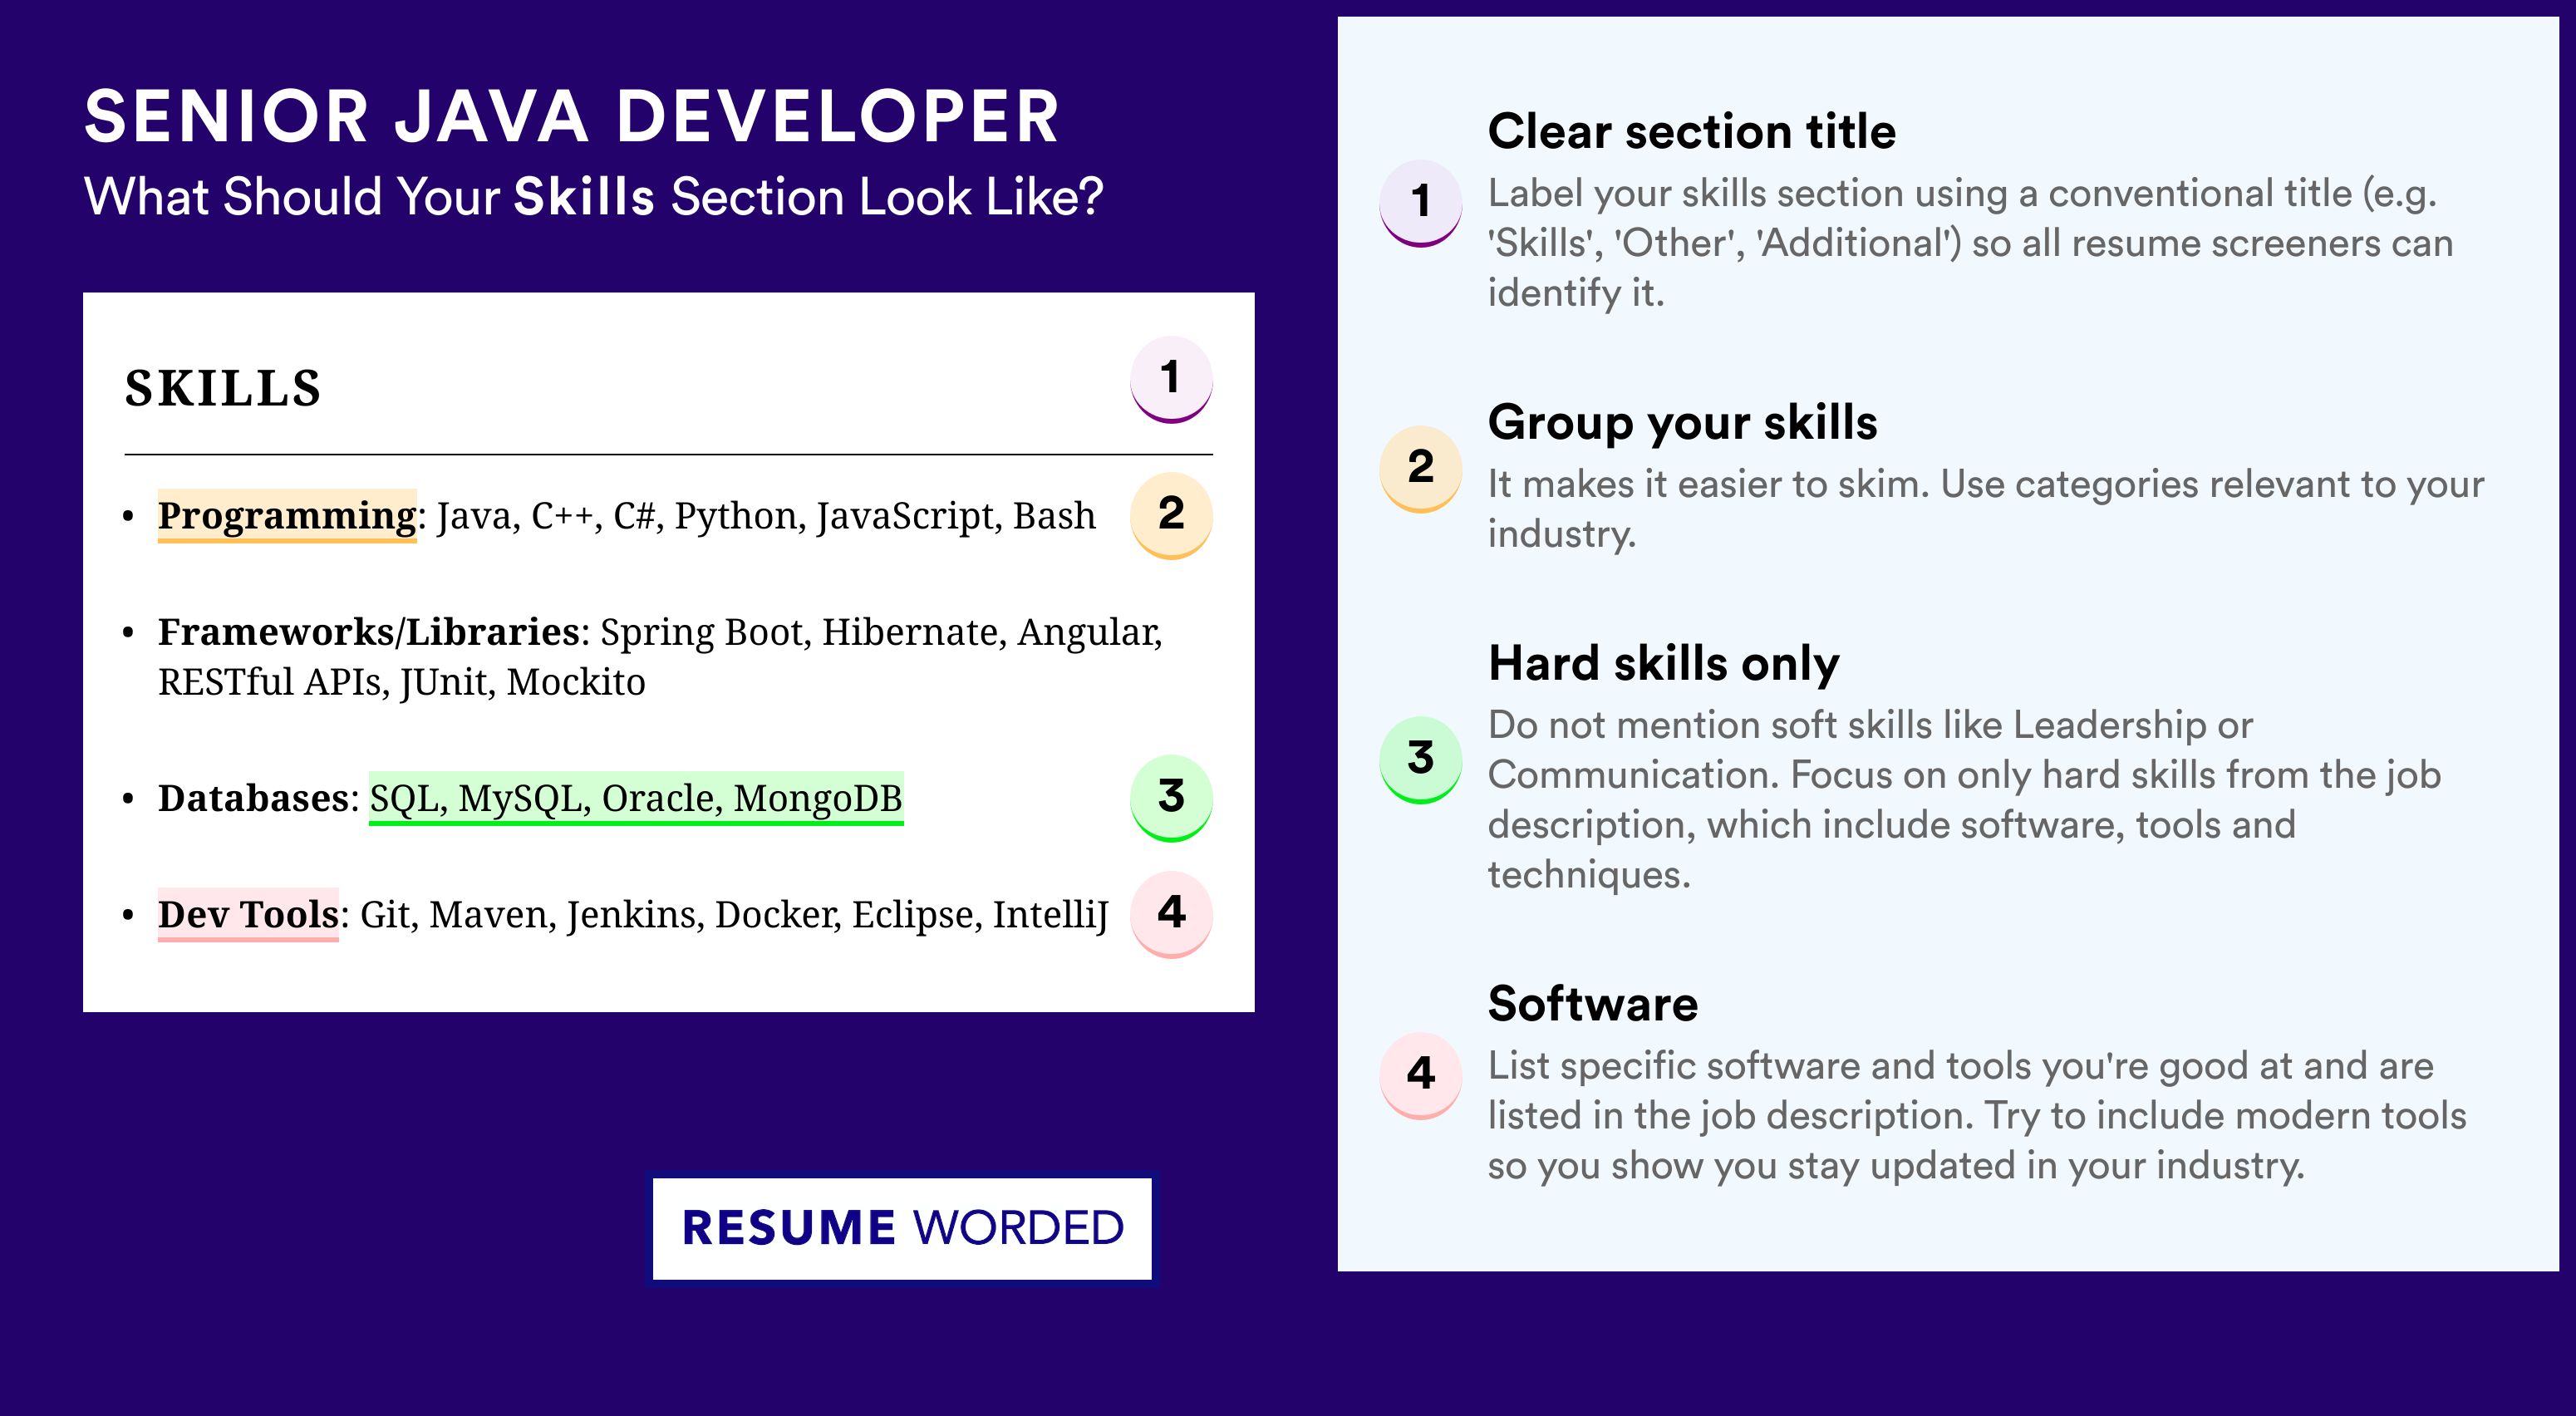 How To Write Your Skills Section - Senior Java Developer Roles